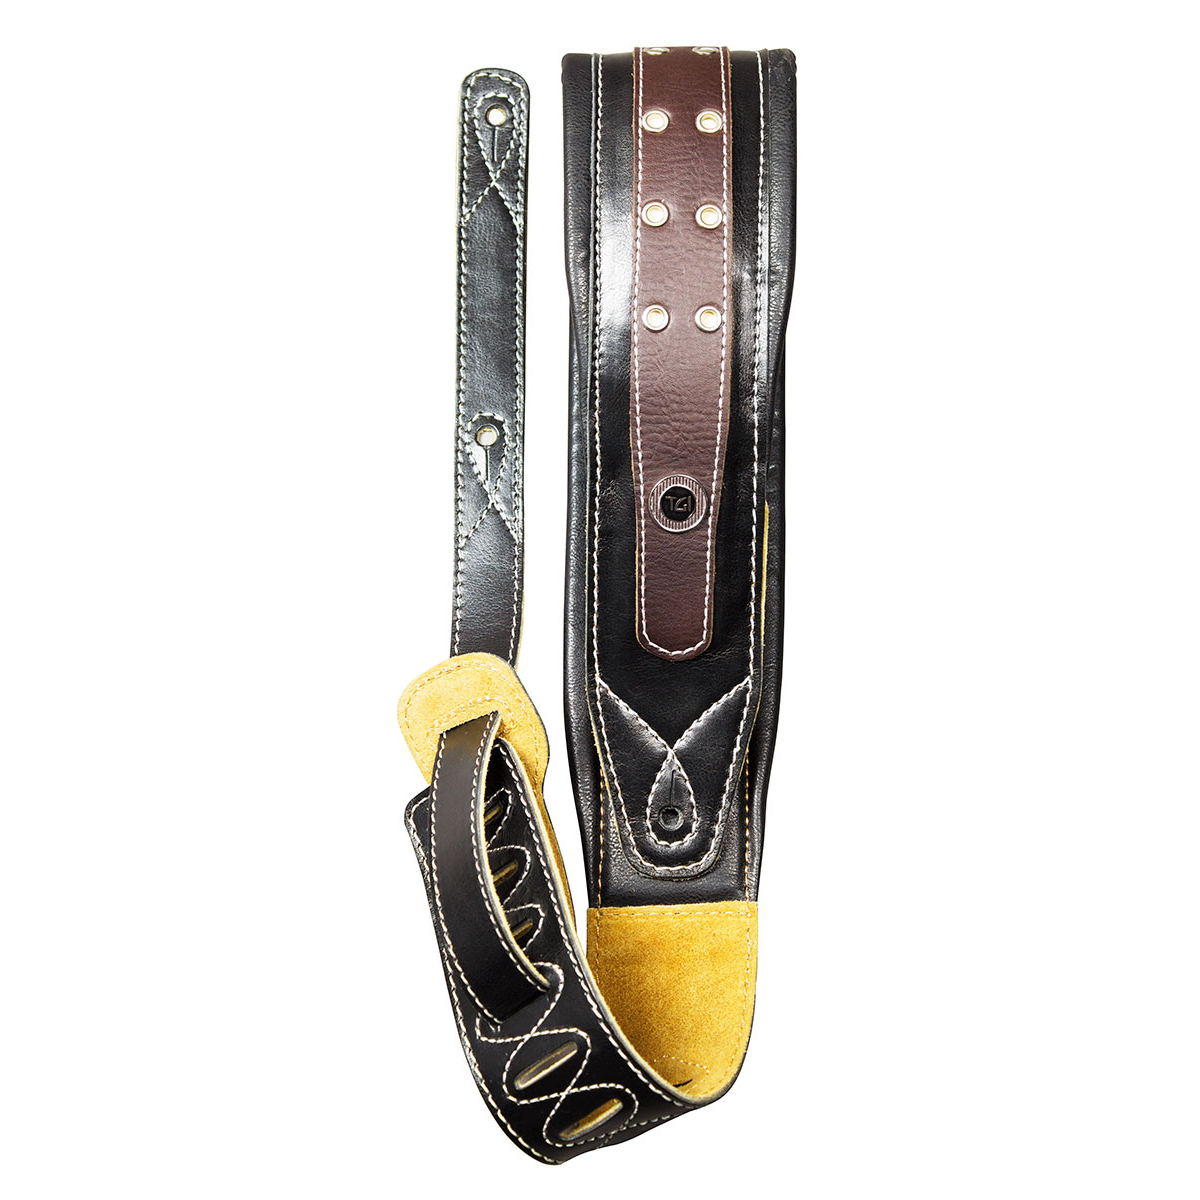 TGI Strap Padded Black/Brown Leather with Eyelets